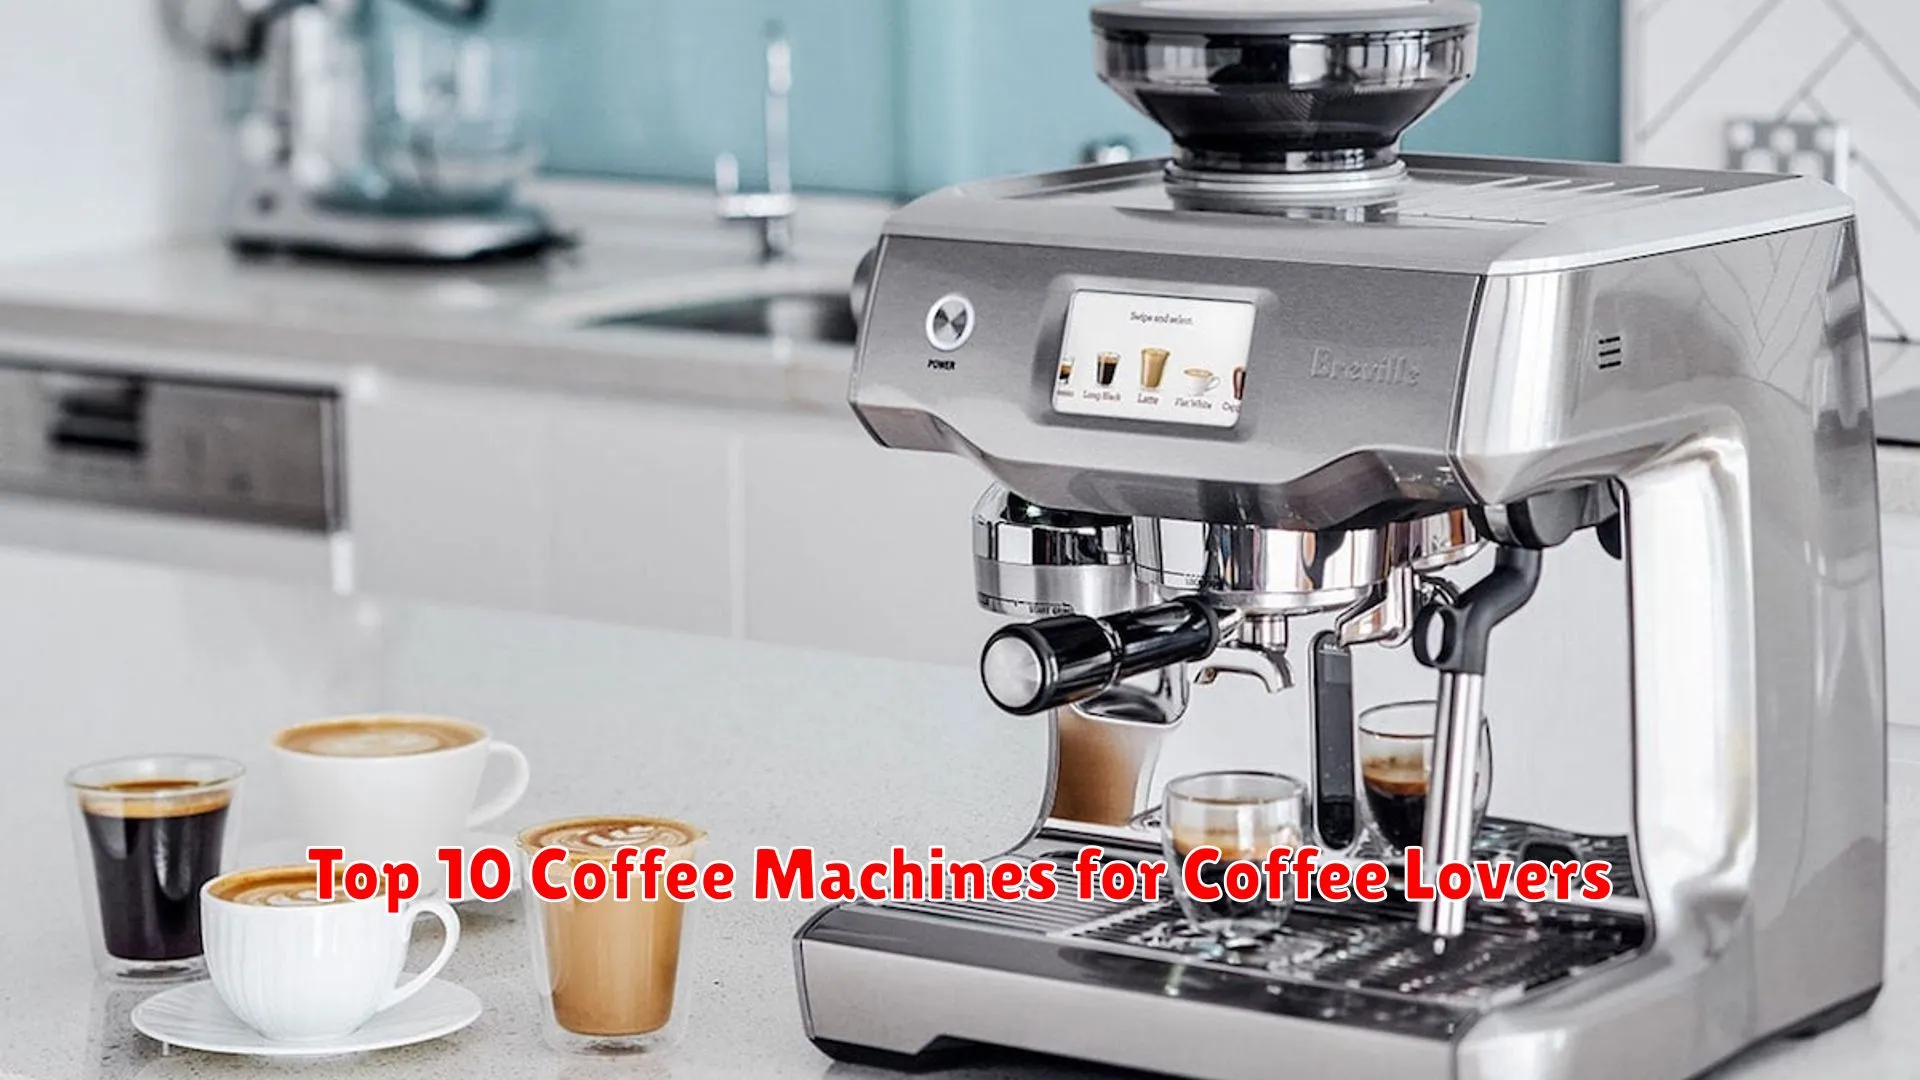 Top 10 Coffee Machines for Coffee Lovers